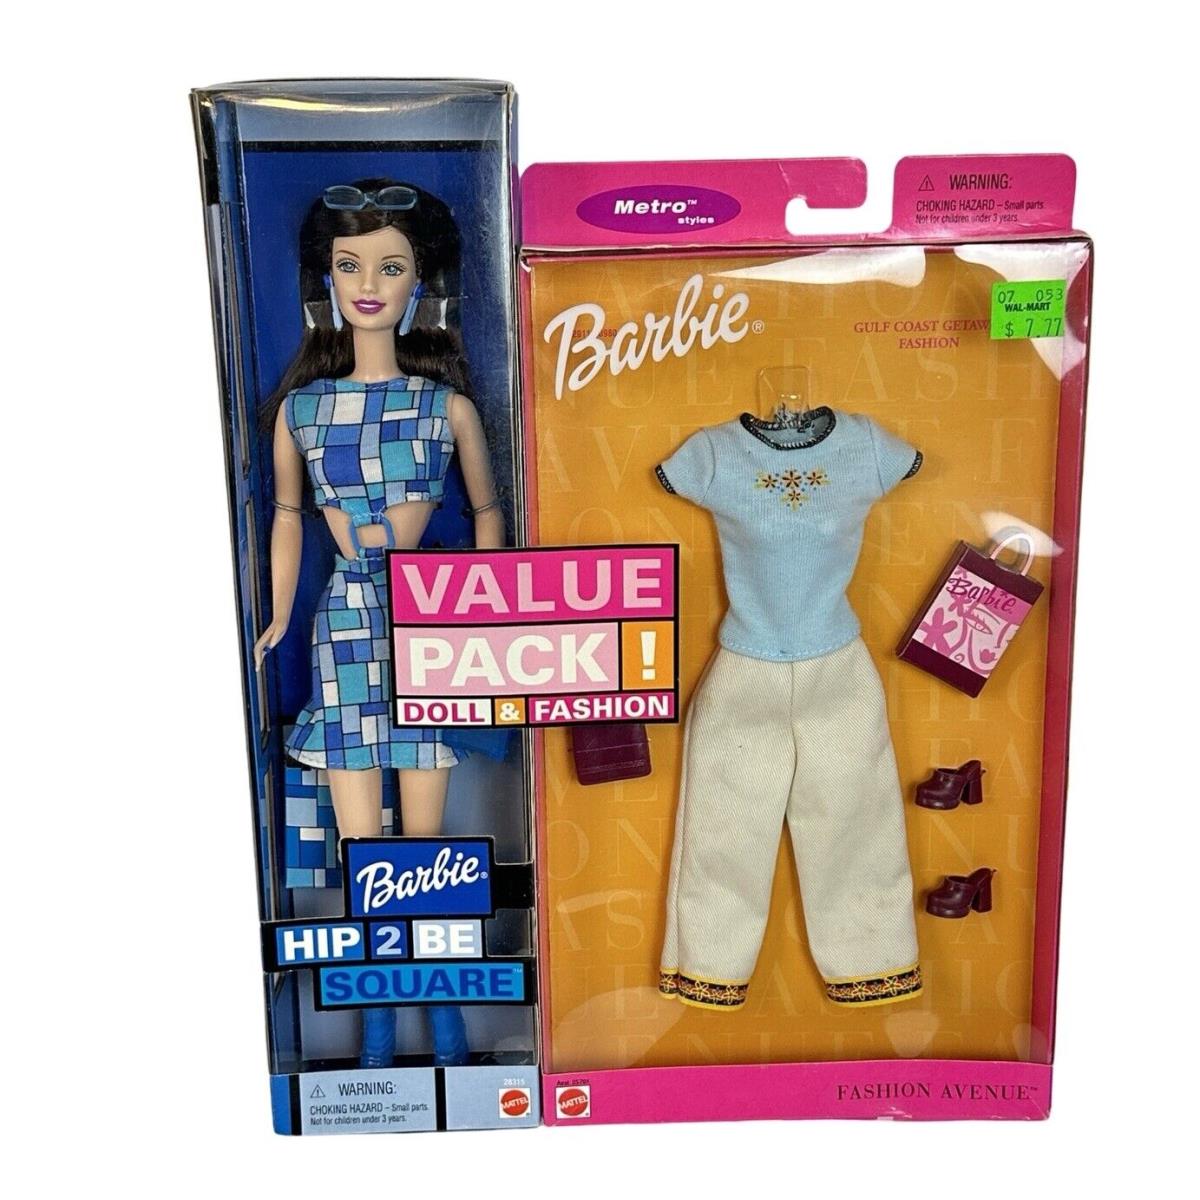 Hip 2 Be Square Barbie Doll Value Pack Blue Dress W/ Outfit 28315 25701